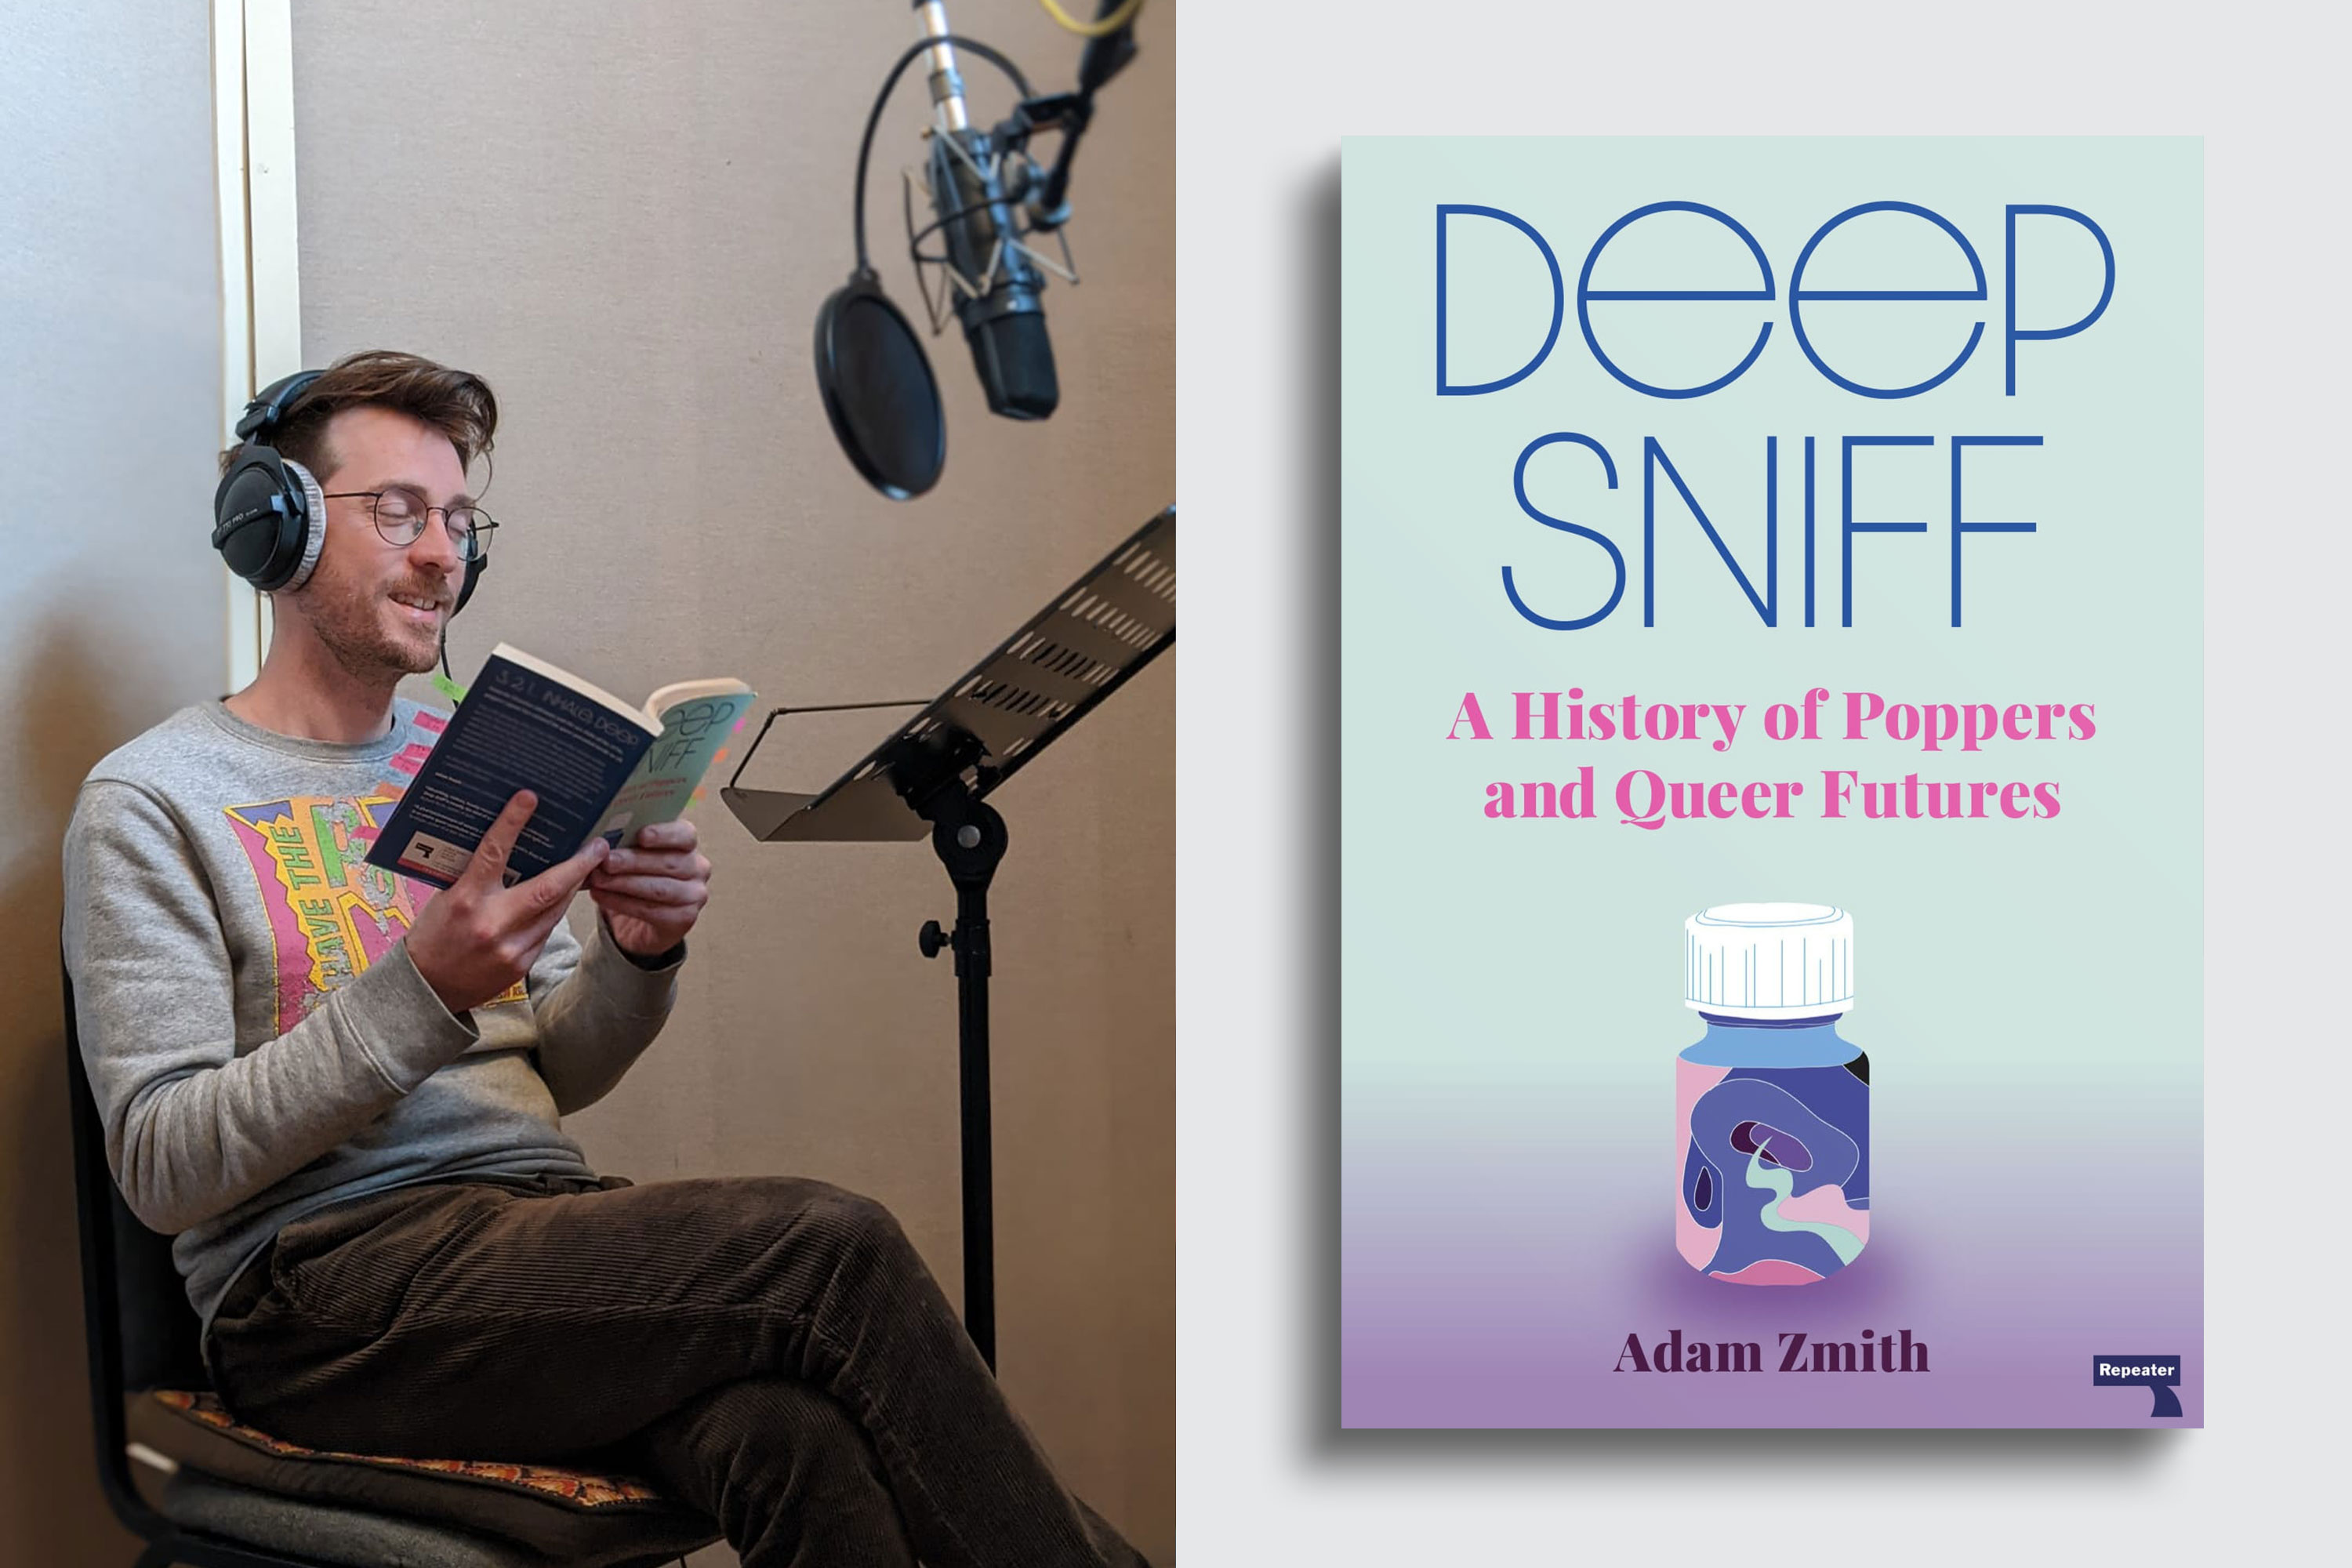 Author Adam Zmith Sniffs Out the History of Poppers in His New Book